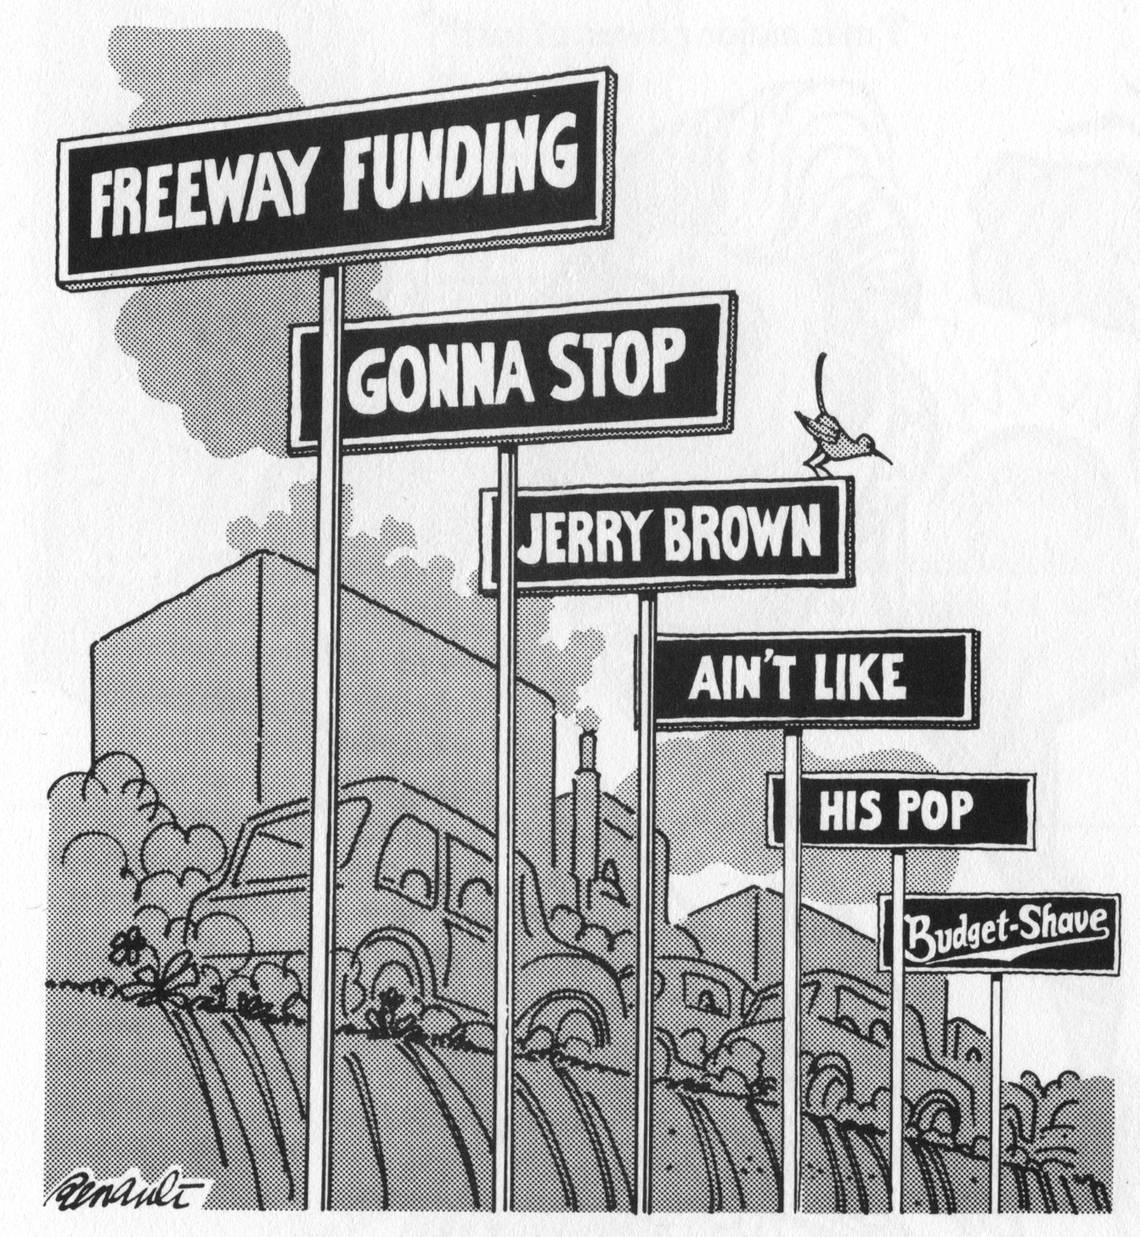 Gov. Jerry Brown’s reversal of the infrastructure building effort that marked his father’s governorship is the subject of a 1975 Dennis Renault editorial cartoon that recalls the Burma-Shave road sign advertising campaigns than ran from 1926 to 1963.